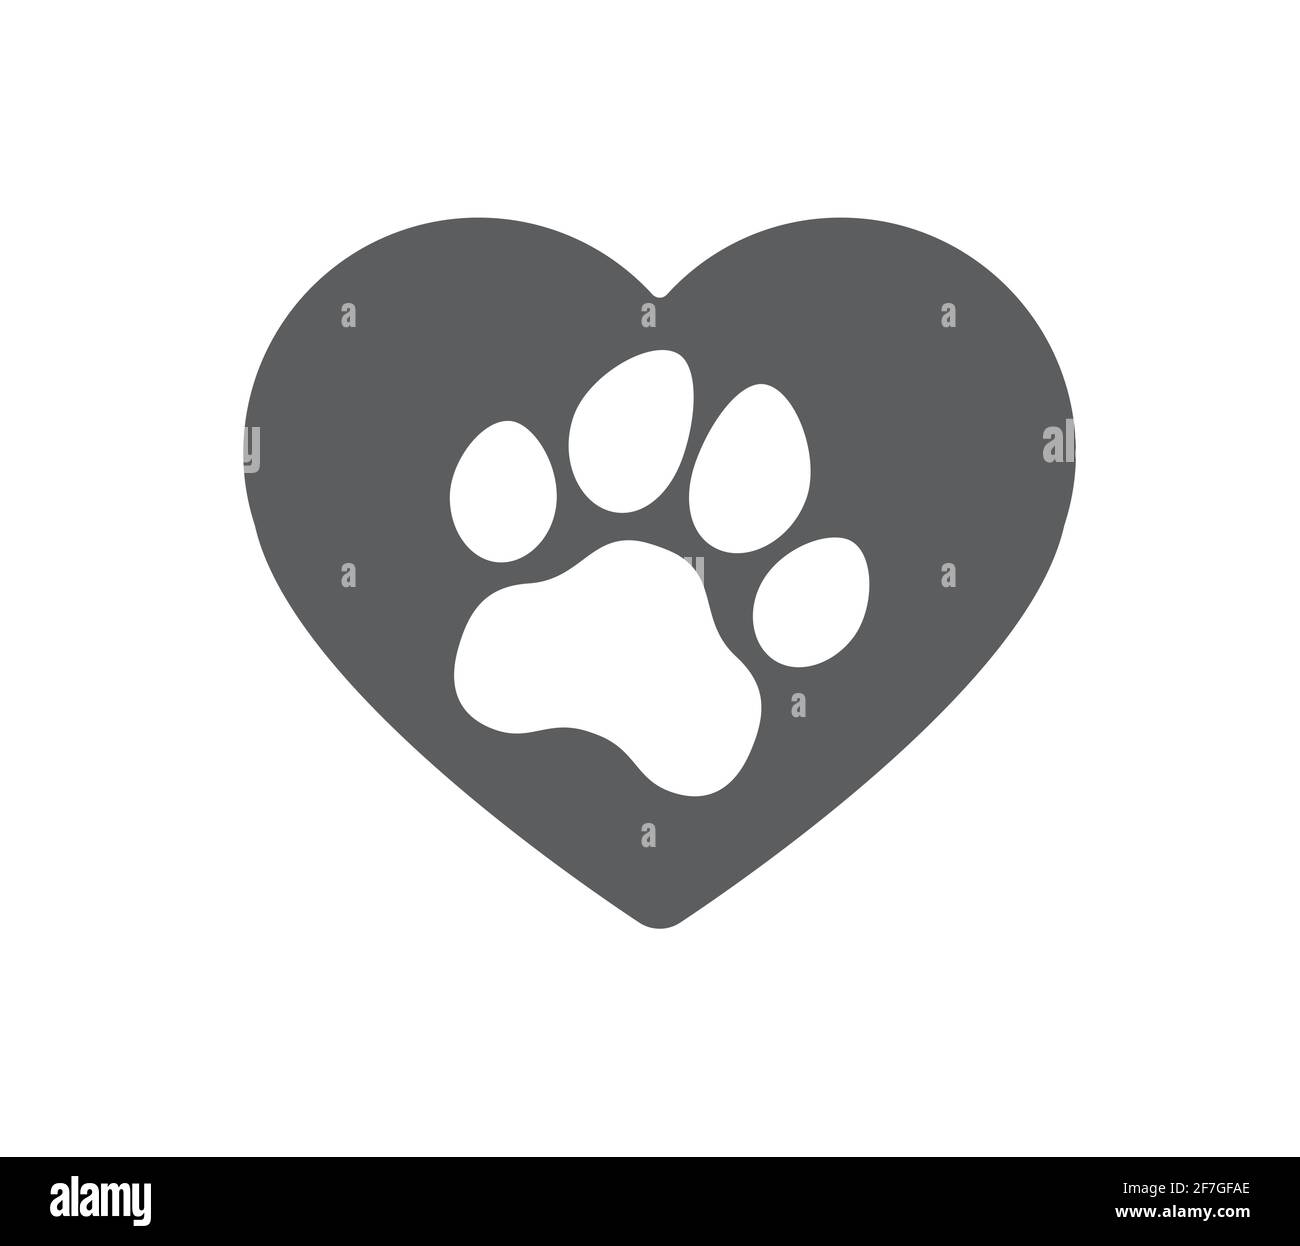 Dog Puppy Cat Paw Silhouette. Icons set. Stock Vector